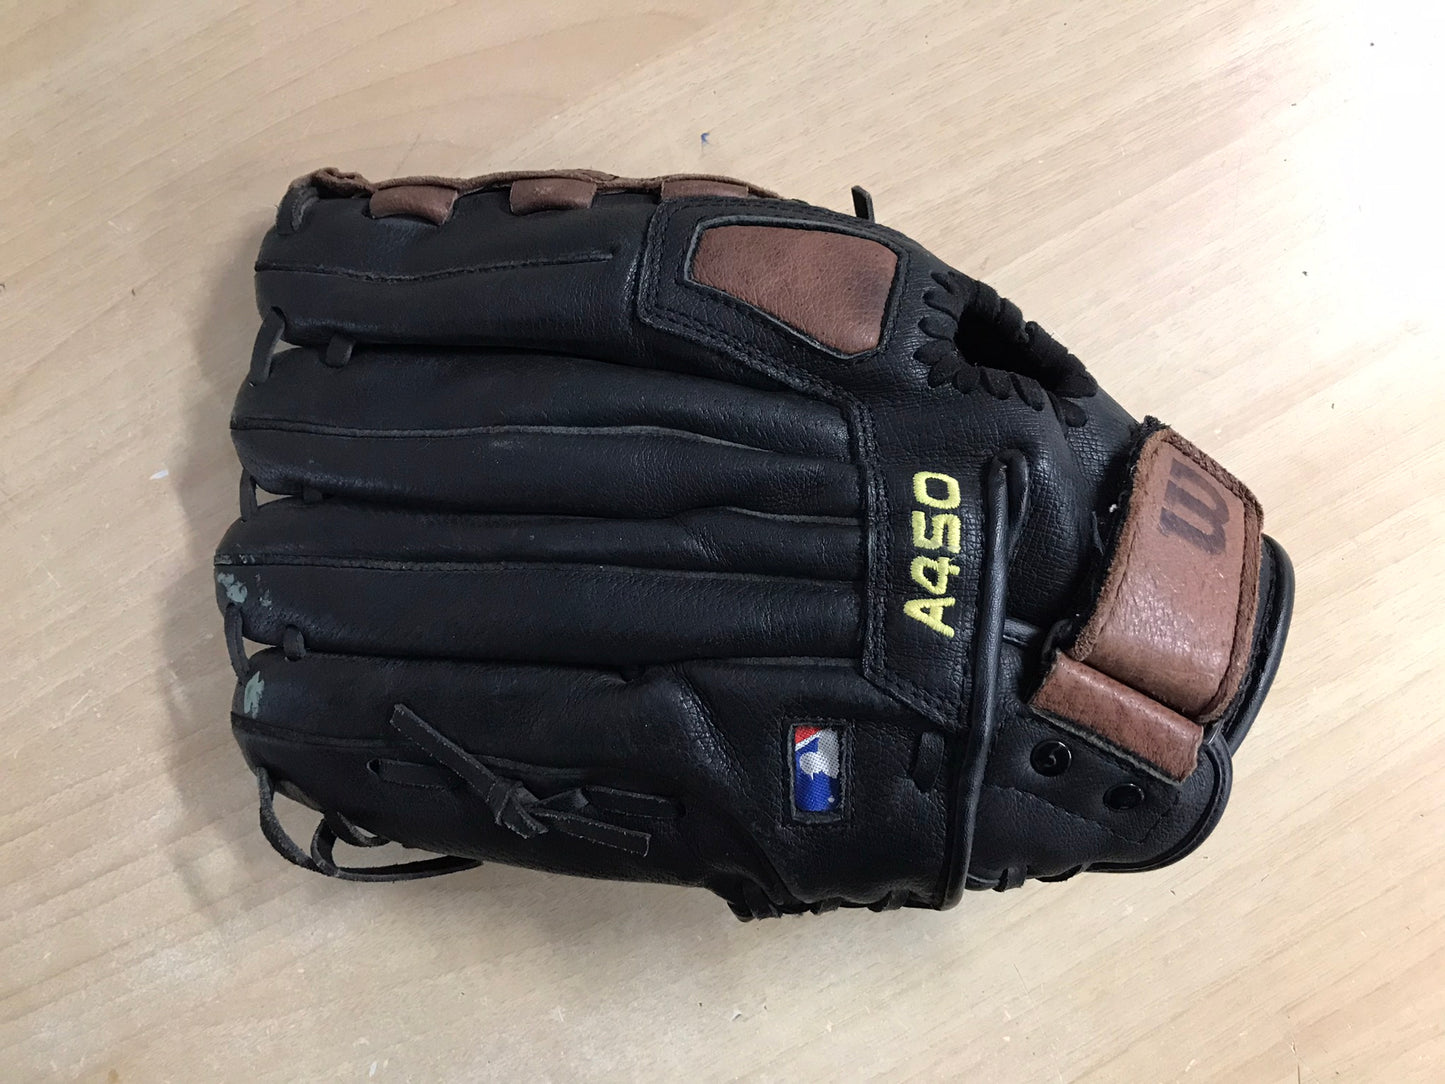 Baseball Glove Adult Size 12 inch Wilson A450 Black Brown Leather Fits on Left Hand Excellent